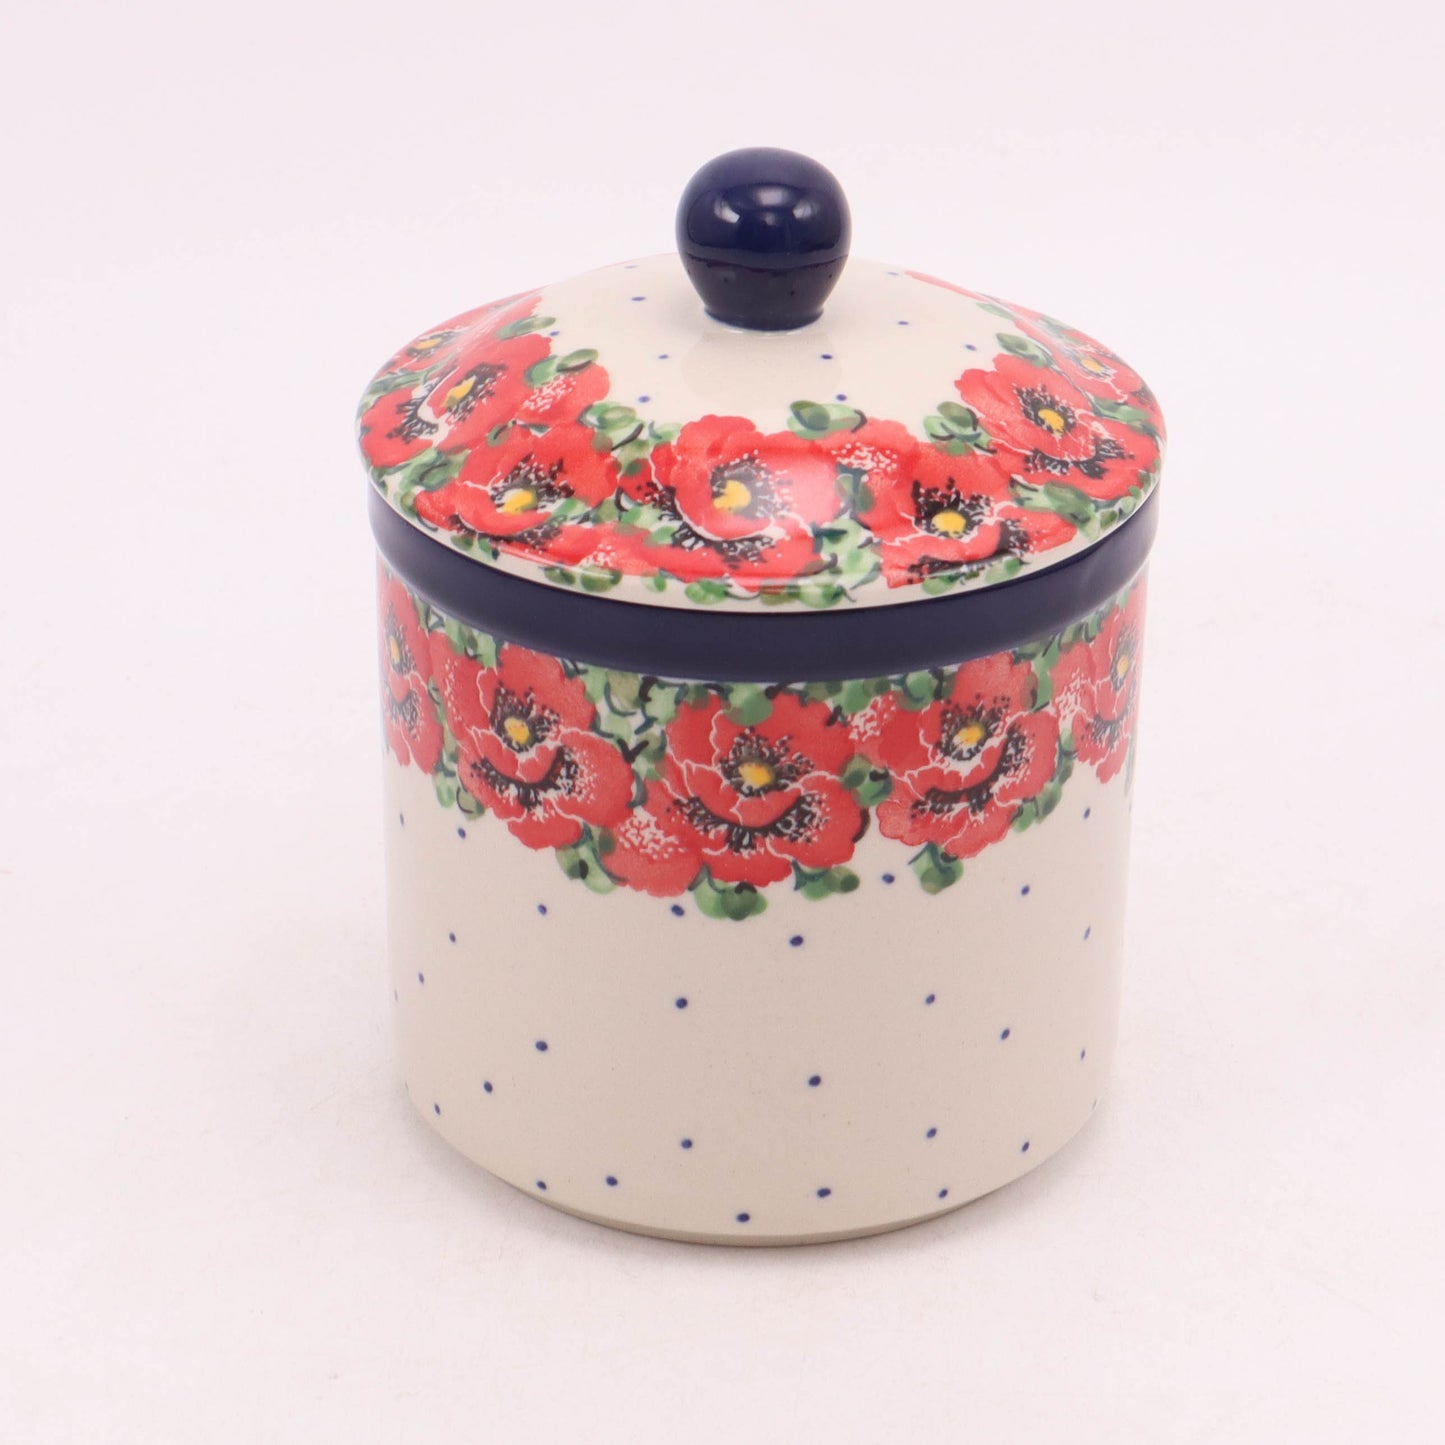 4"x5.5" Round Container with Lid. Pattern: Surroundings Inspiration